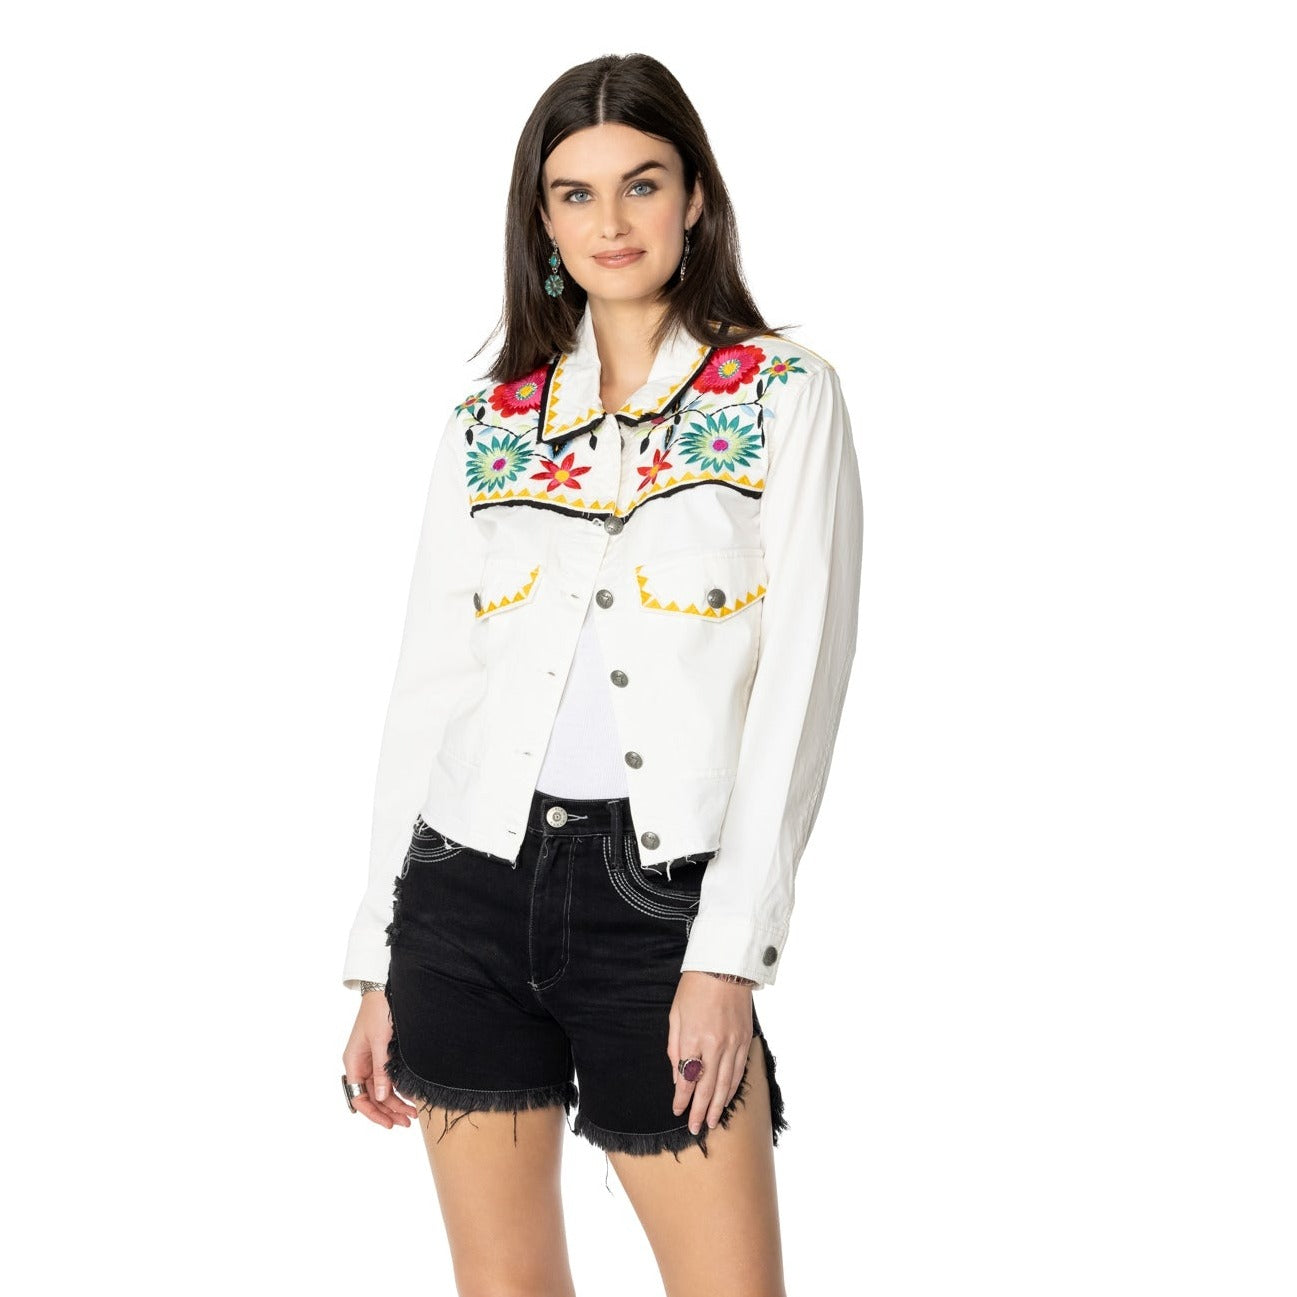 Load image into Gallery viewer, DDR Que Milagro Cotton Jacket in sea salt / white at 6whiskey six whisky by double d ranch womens spring style number C3057 folk forary
